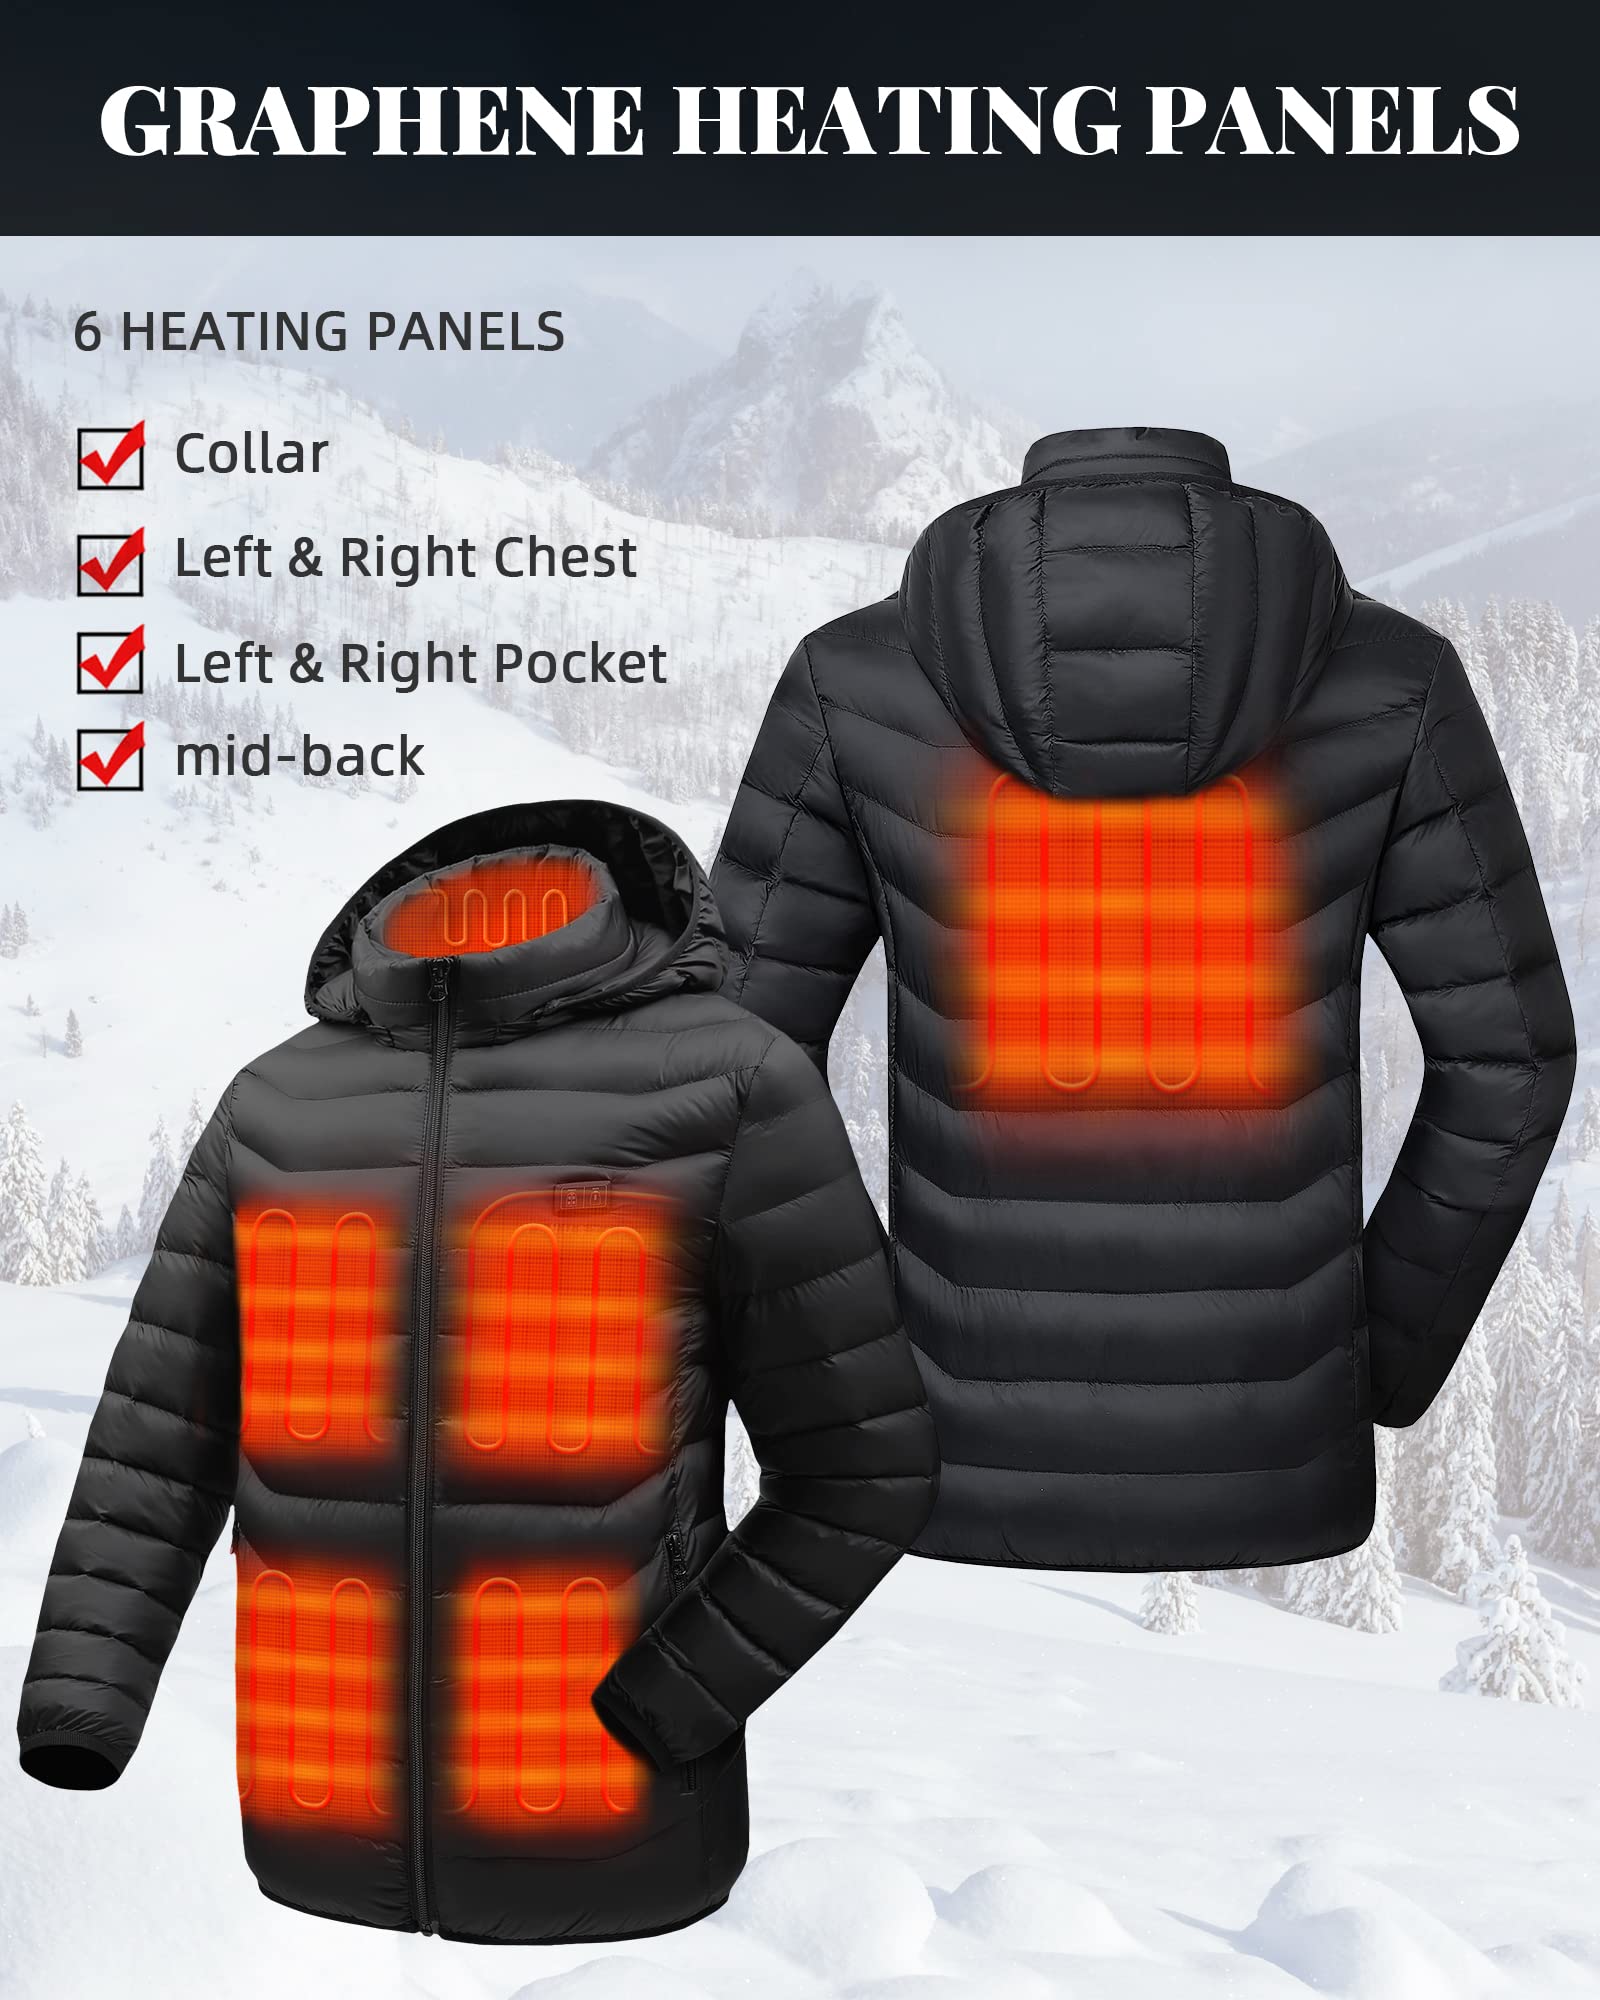 PLIDINNA Women's Heated Vest with Battery Pack 7.4v, Lightweight Warm Electric Heating Vest for Hunting,Outdoor Sports